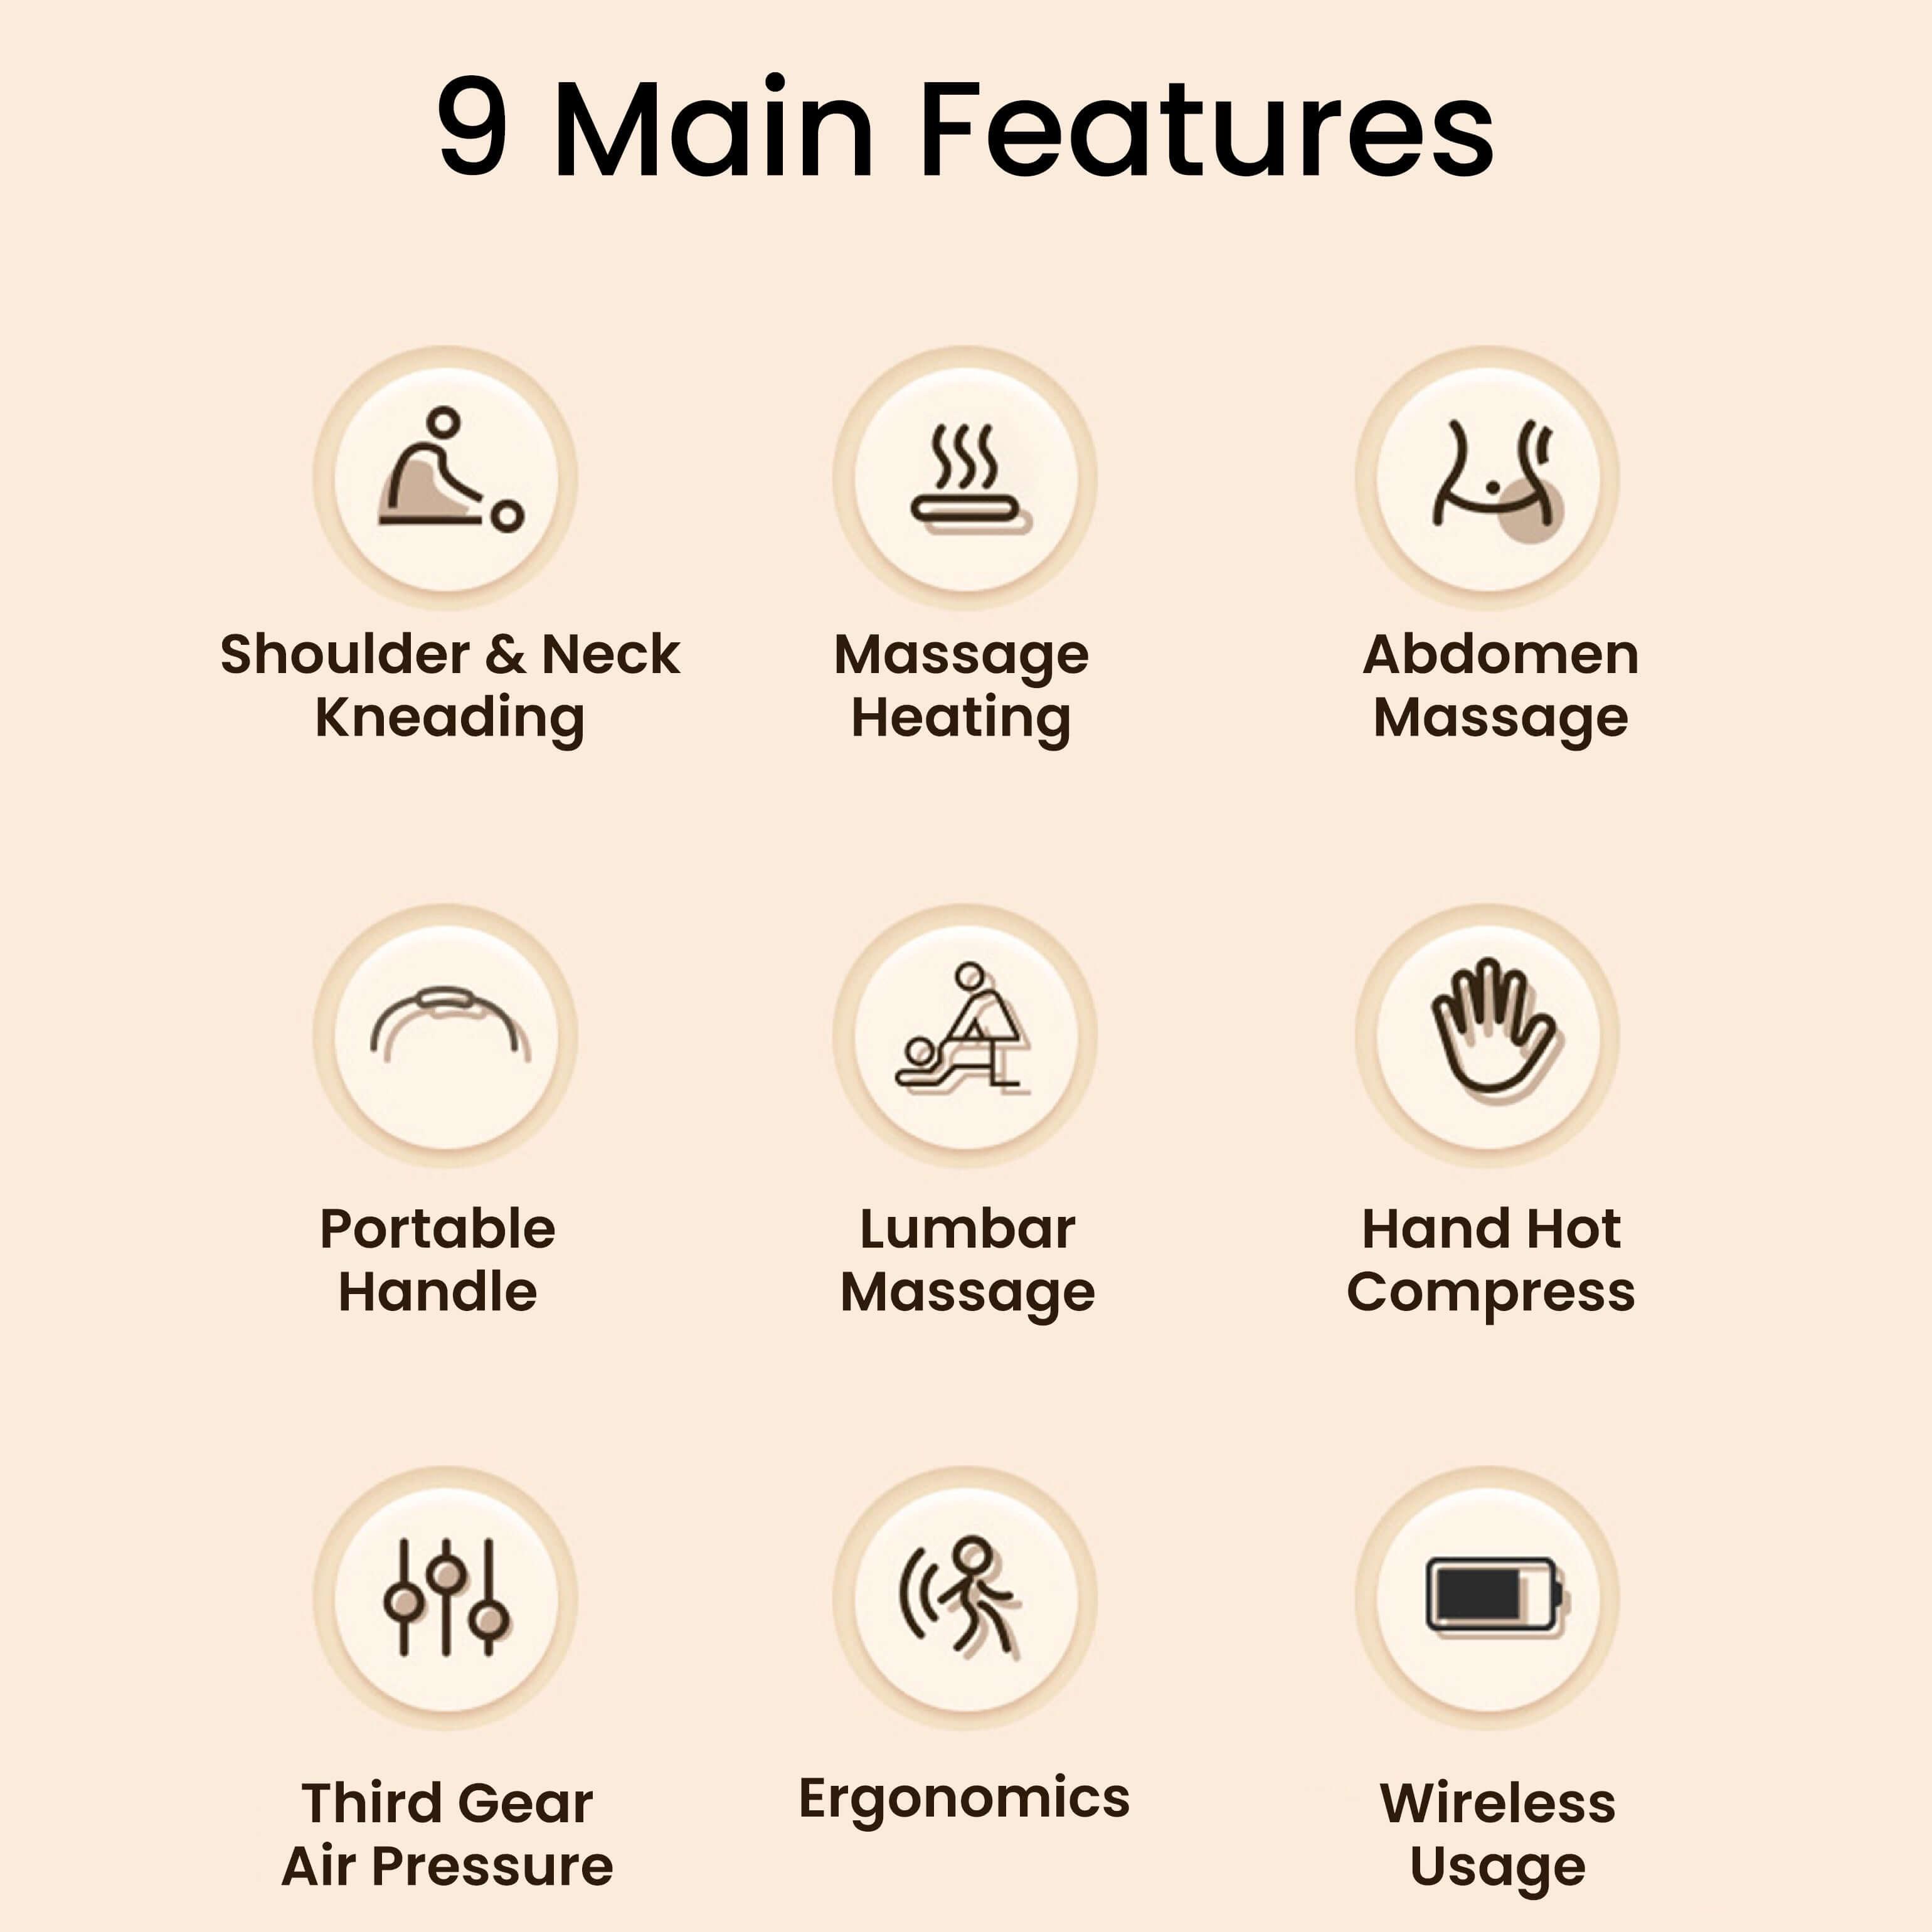 "9 main features of hand and abdomen massager including shoulder kneading, massage heating, abdomen massage, and more functions"